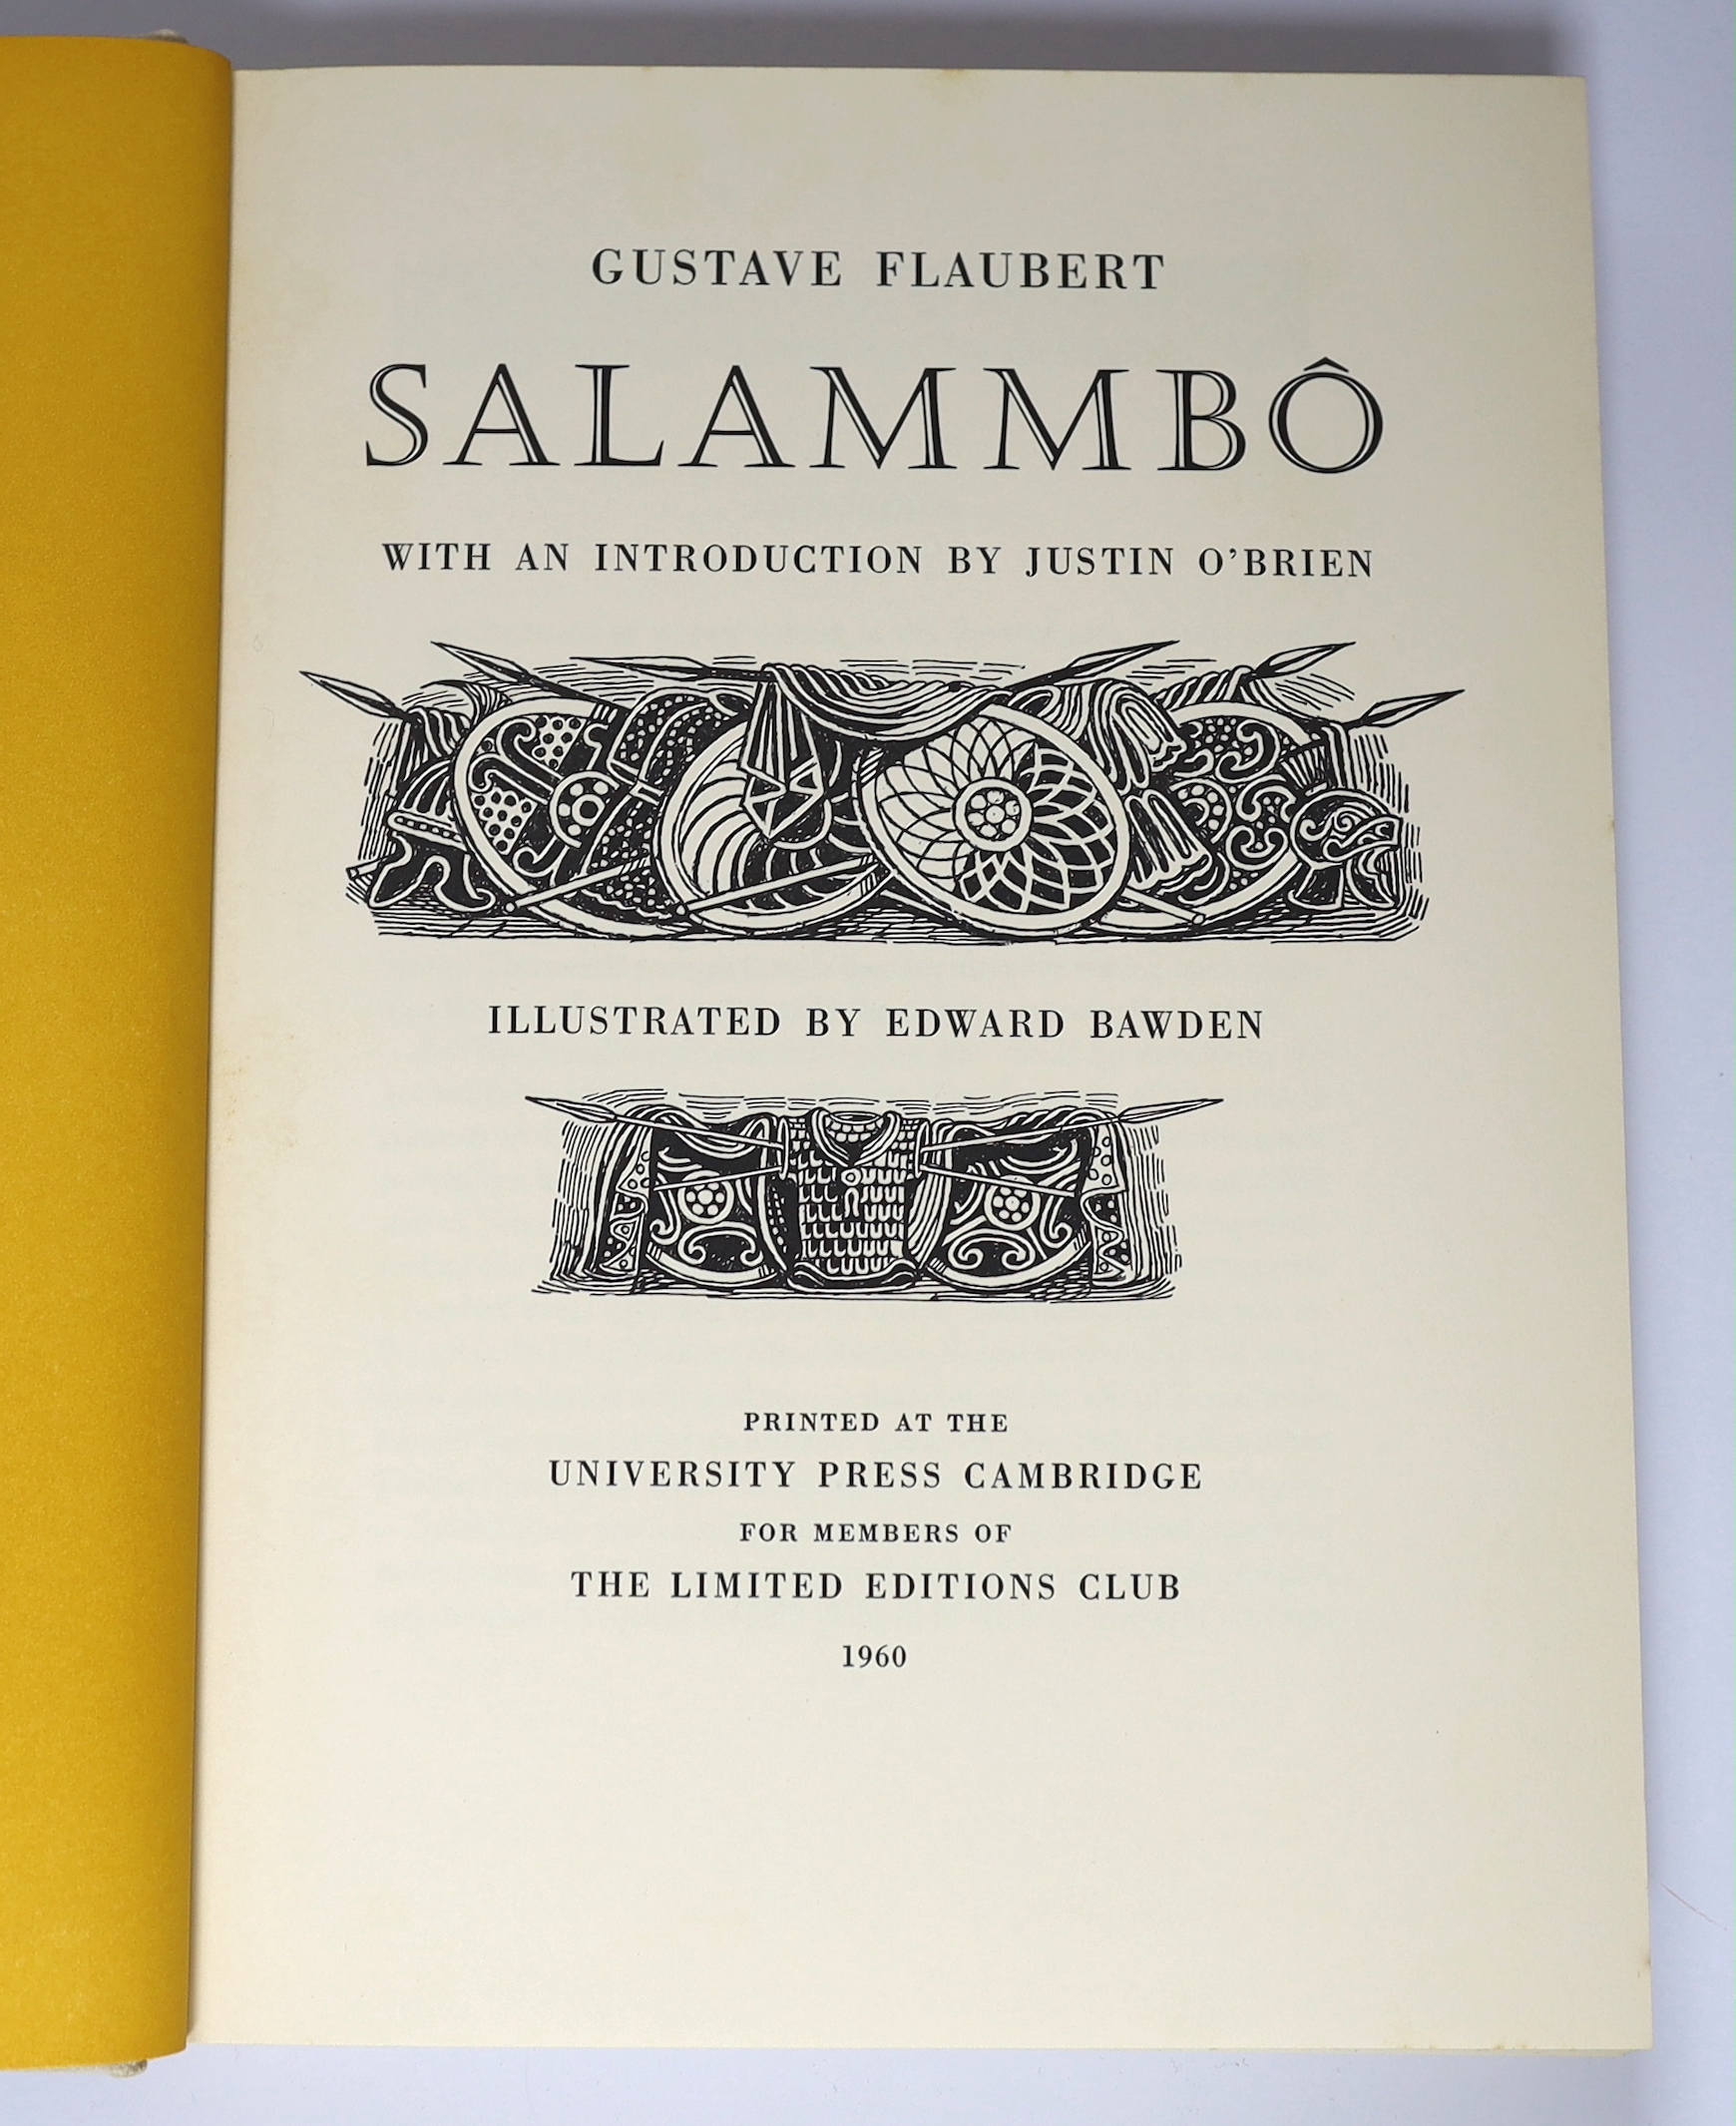 Flaubert, Gustave - Salammbo, one of 1600 signed by the illustrator Edward Bawden, 4to, original cream buckram, with 8 double-page plates, The Limited Editions Club, University Press, Cambridge, 1960, in slip case.